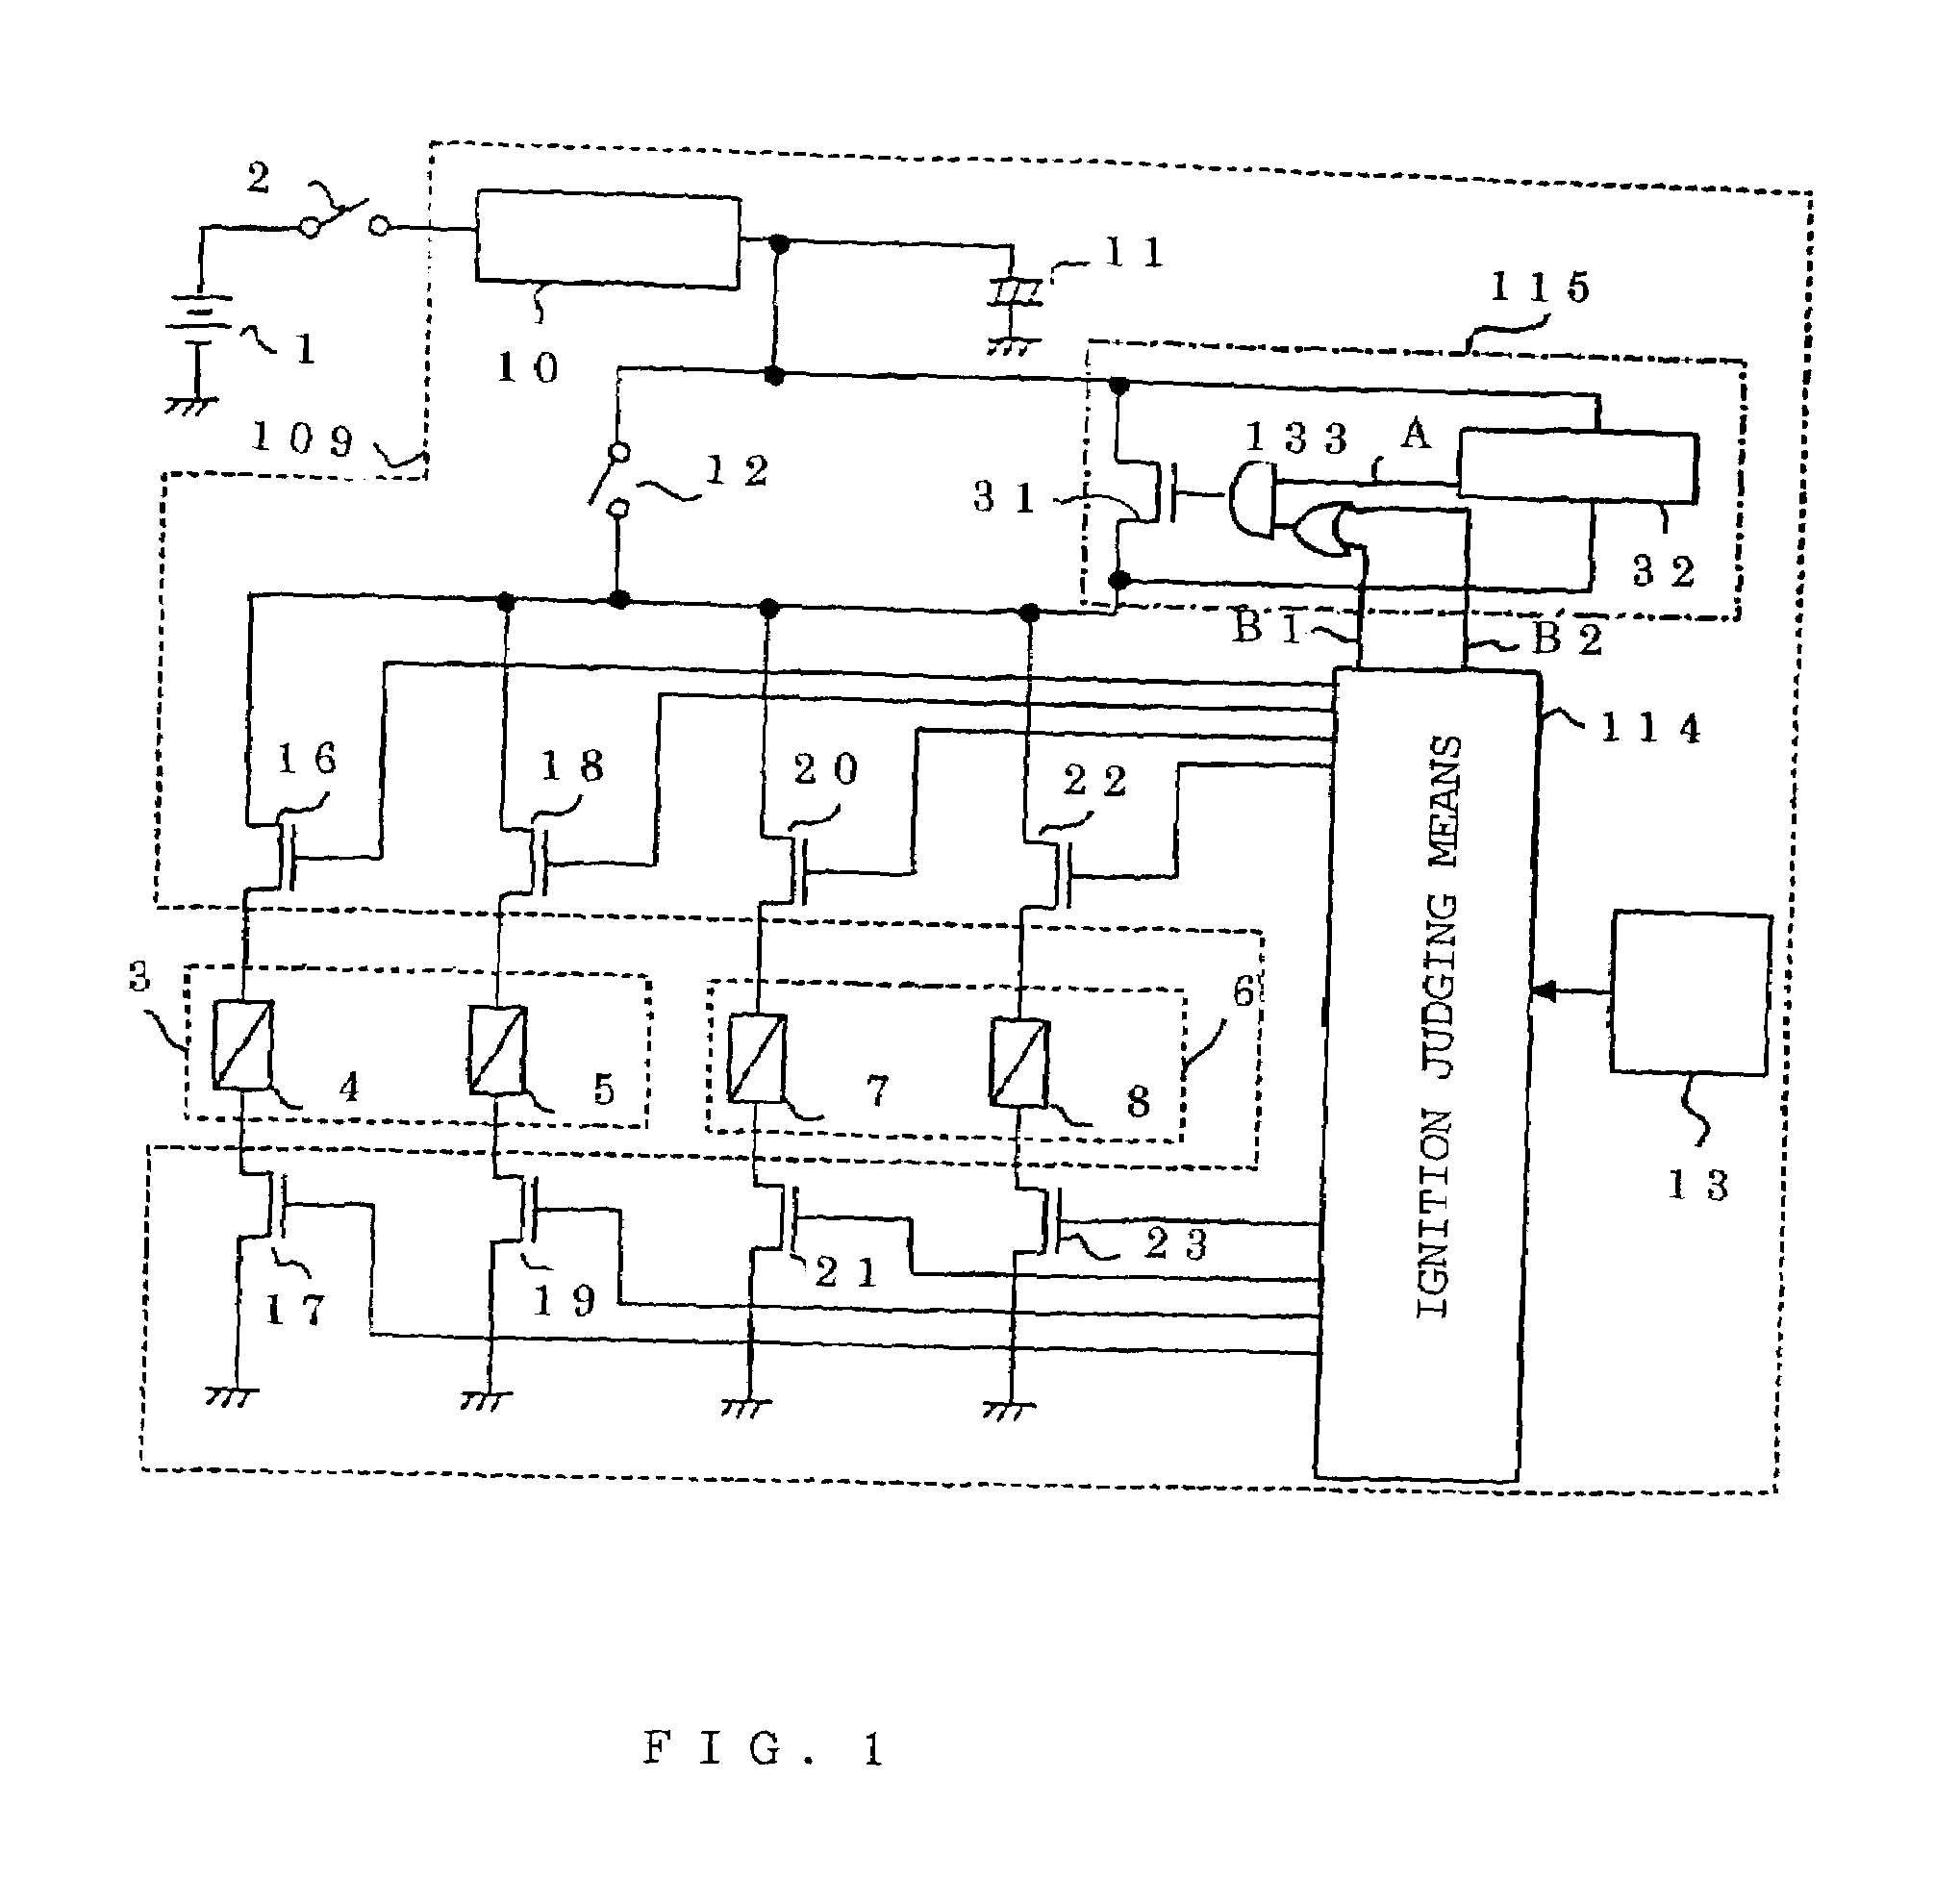 Air bag starter and backup circuit used therein